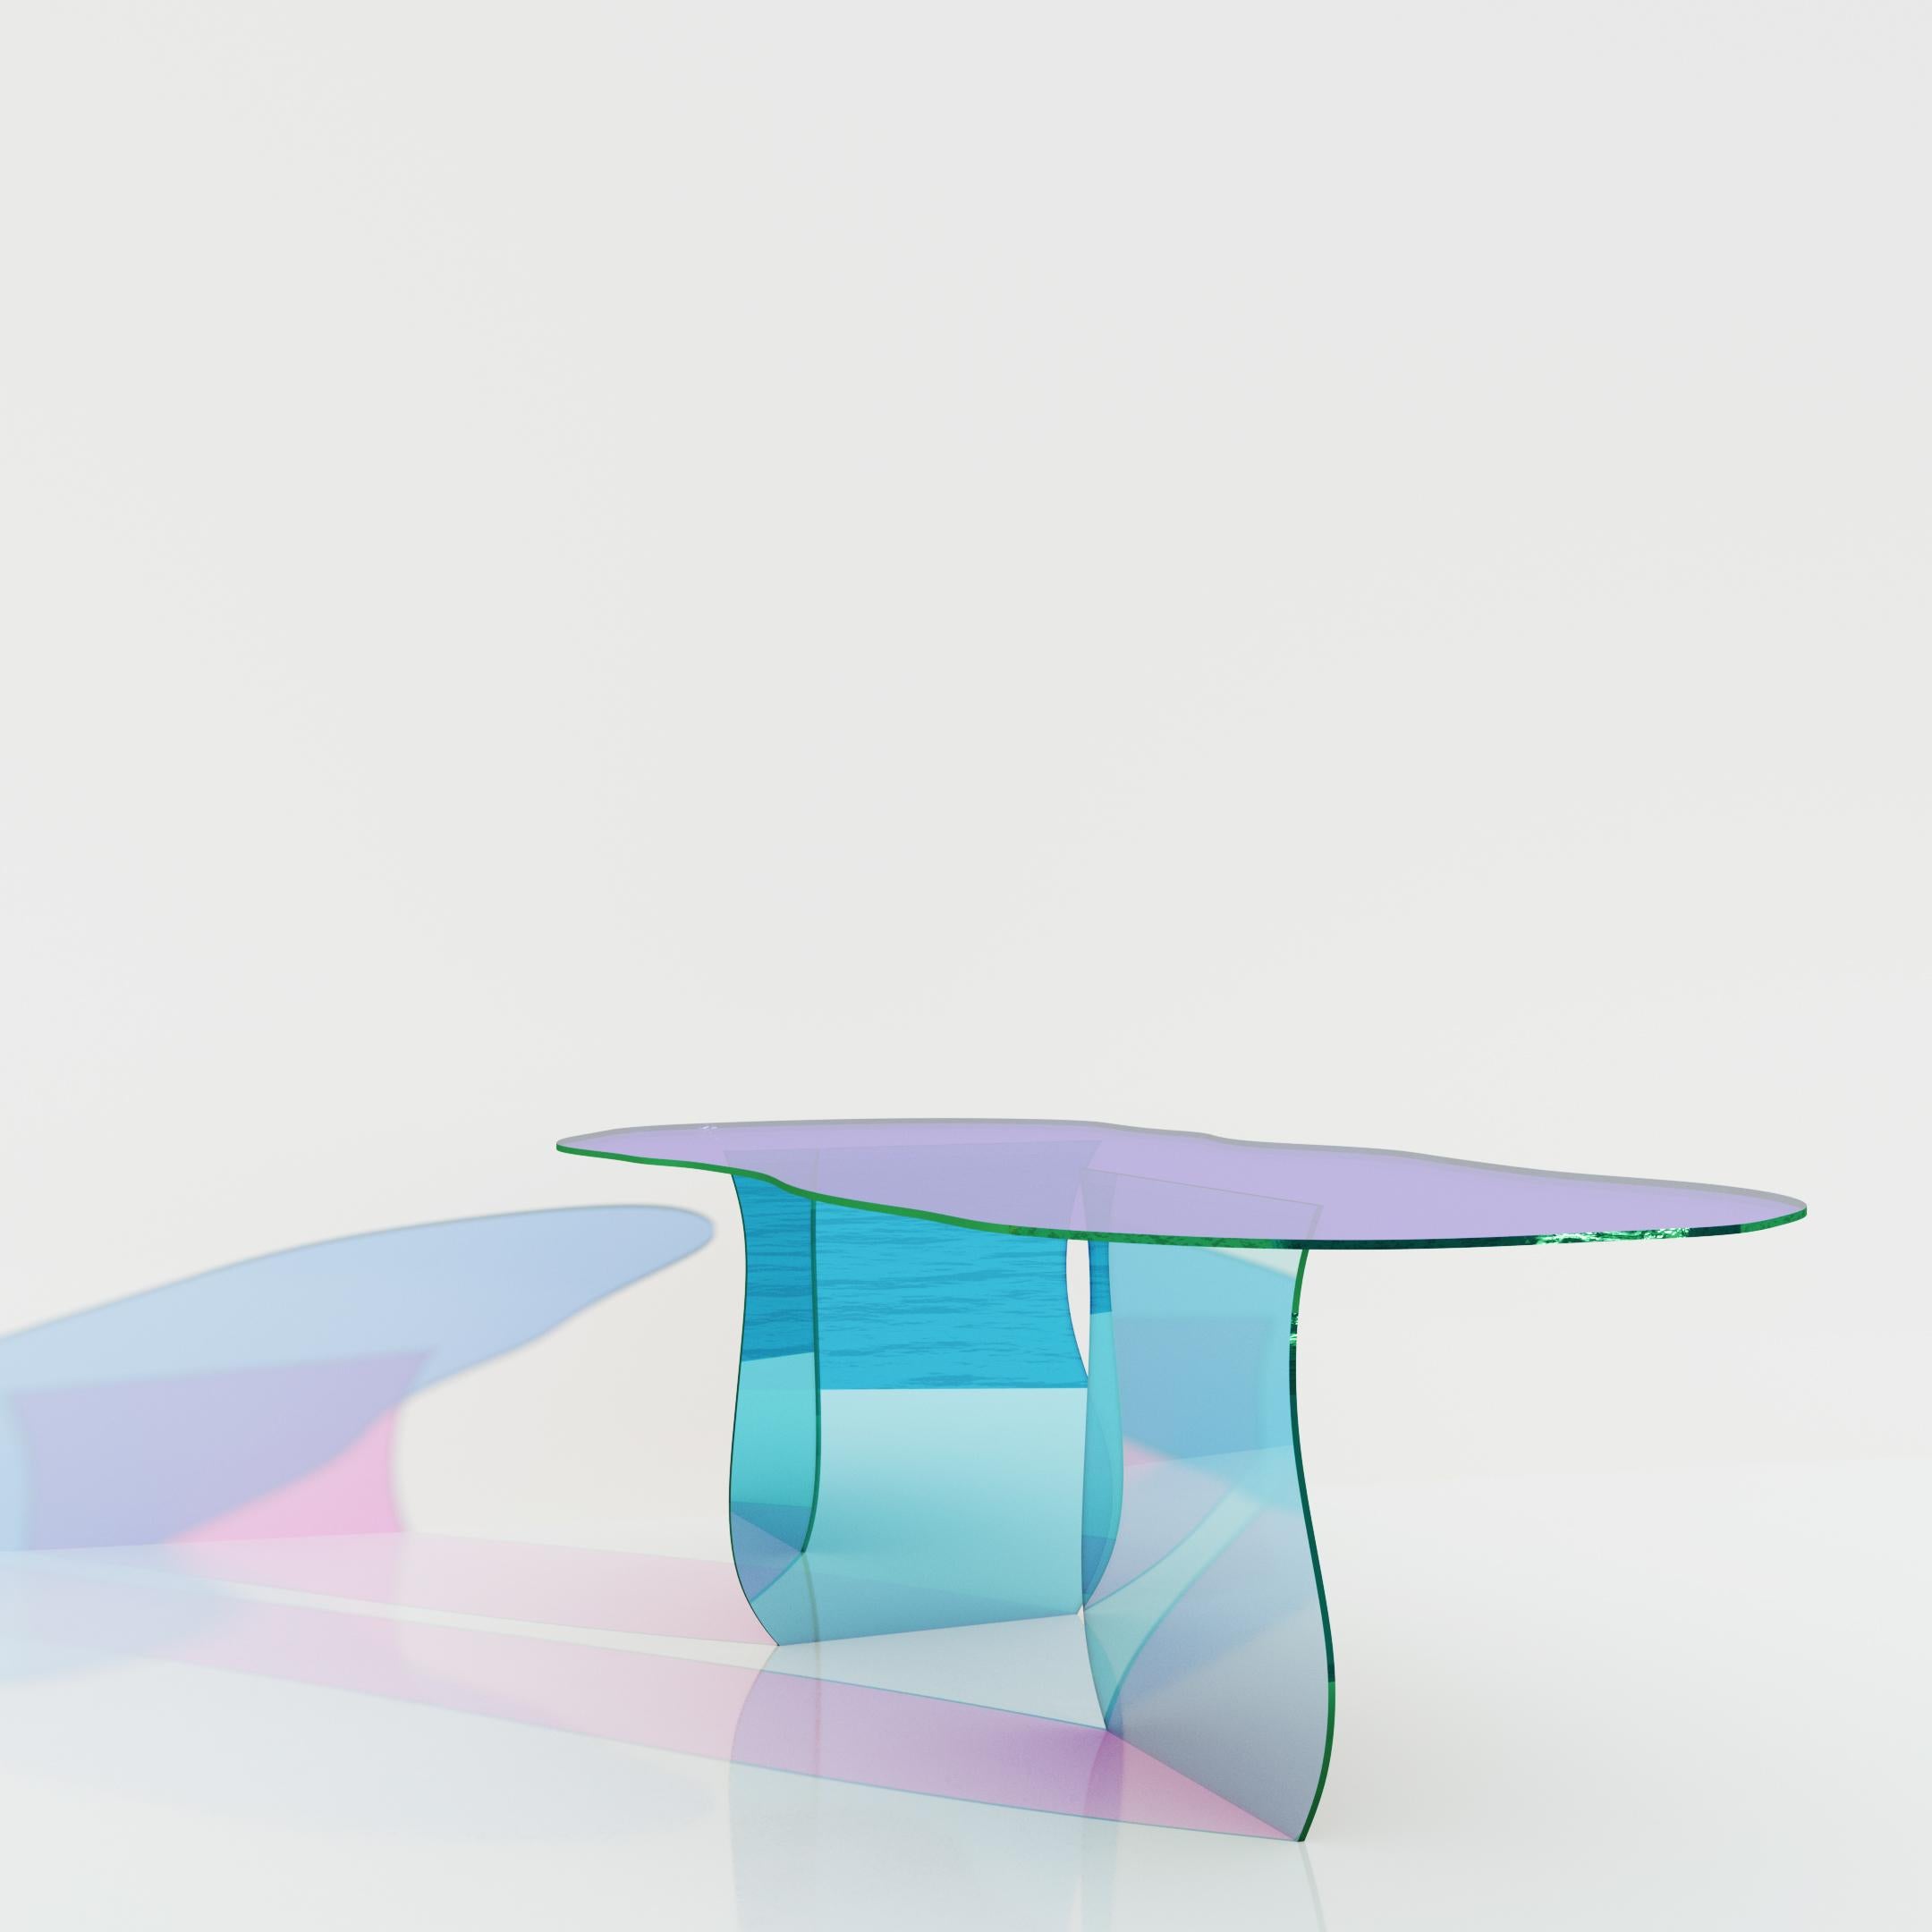 European Isola Console Table by Brajak Vitberg